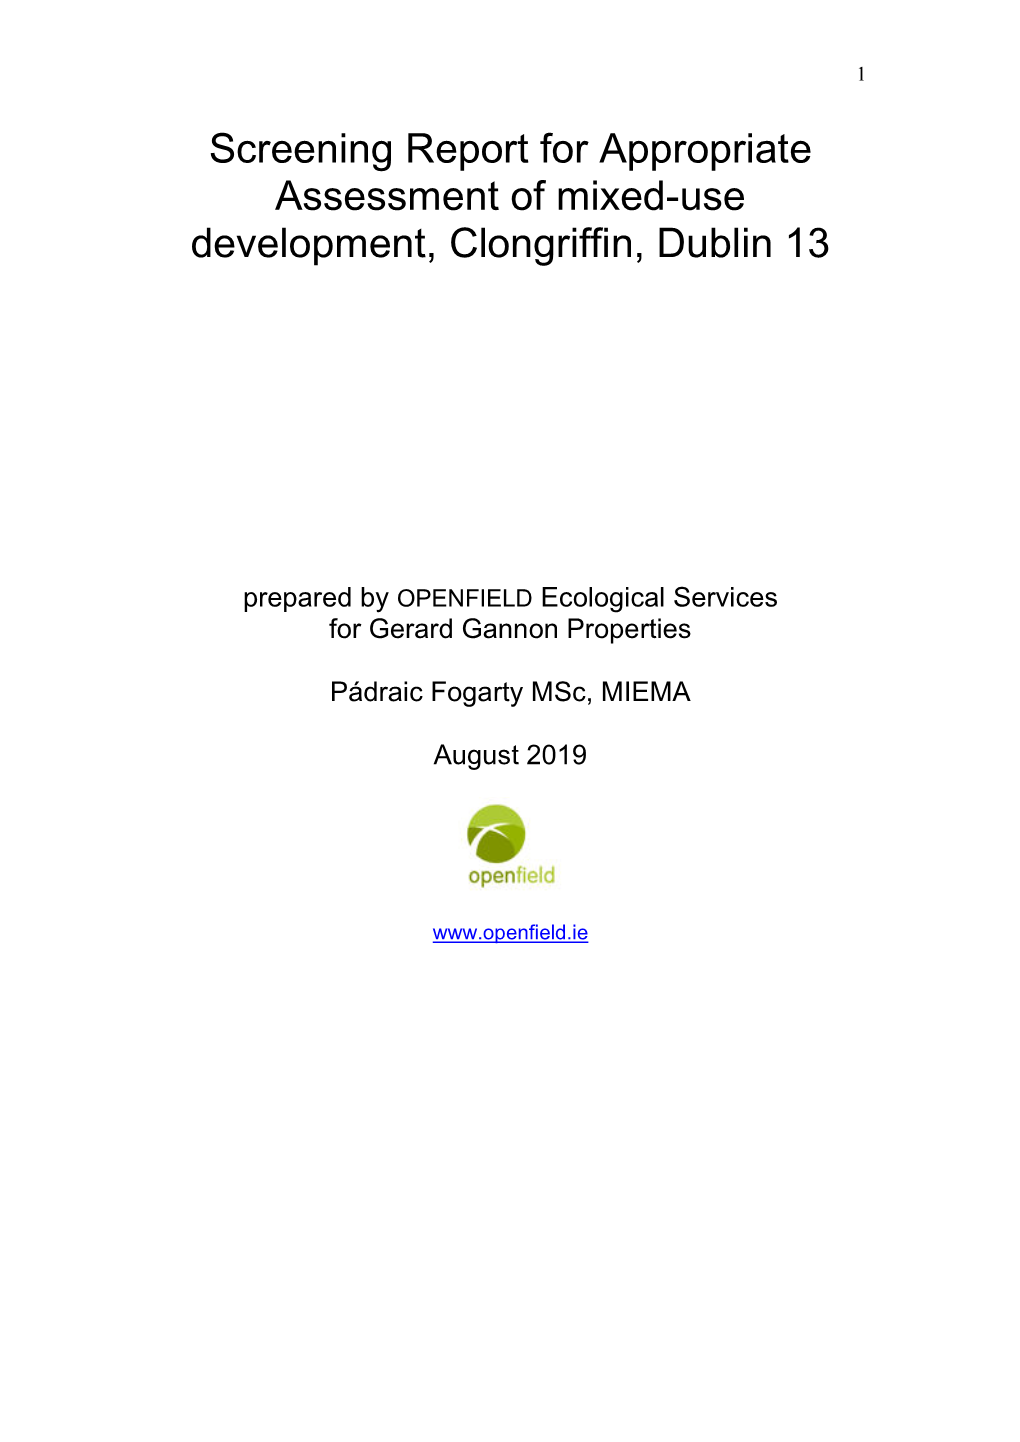 Screening Report for Appropriate Assessment of Mixed-Use Development, Clongriffin, Dublin 13